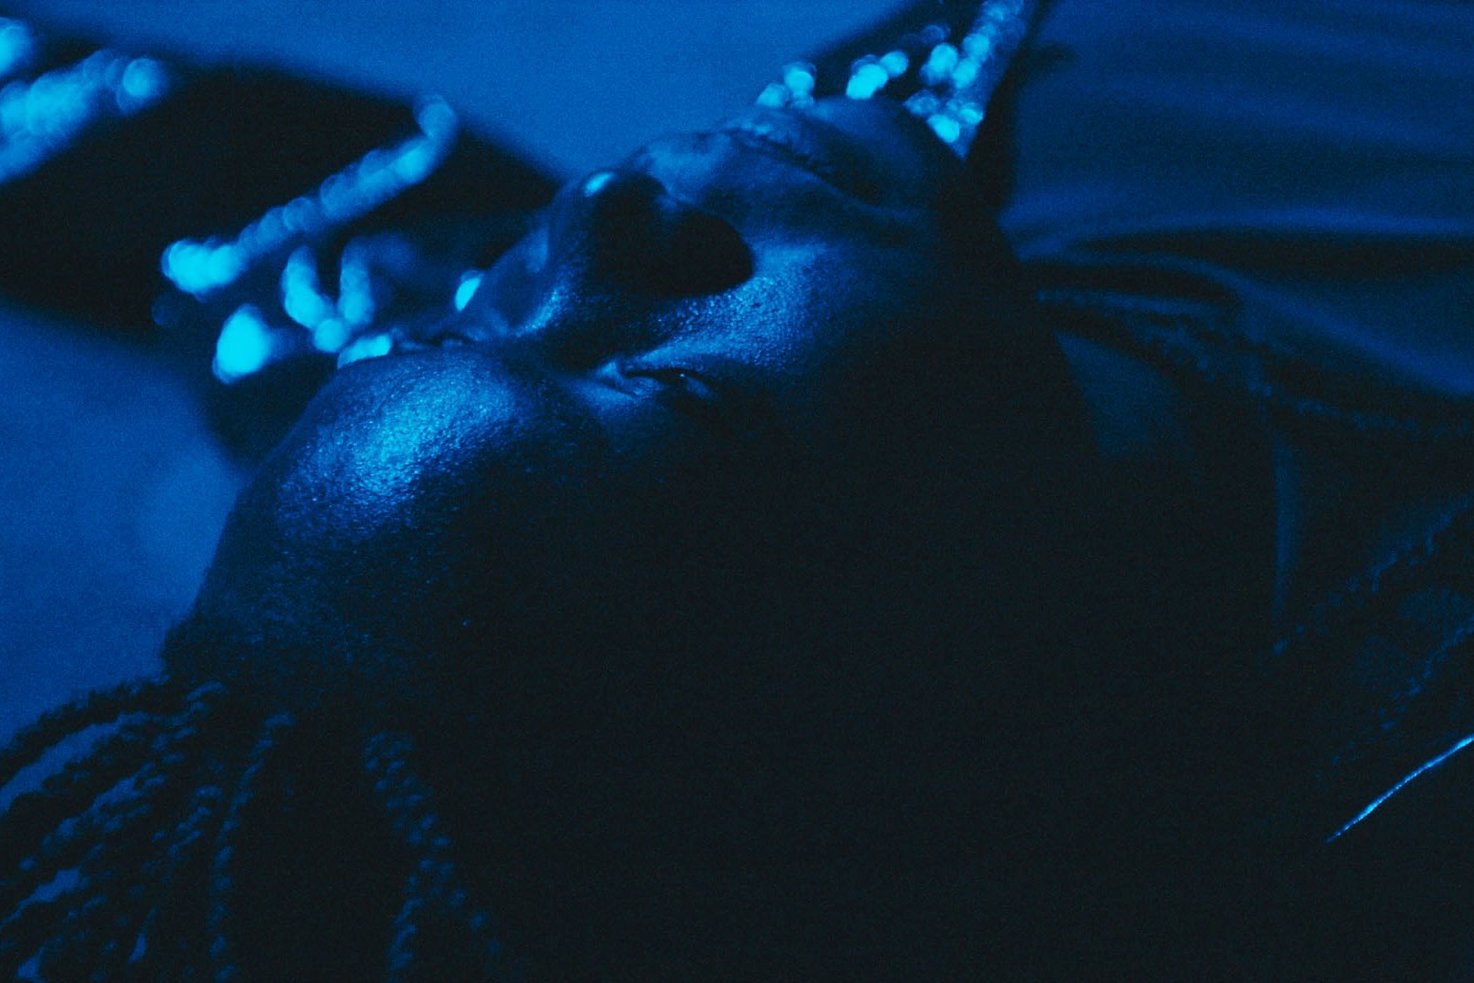 Close-up of the face of a Black person in blue light